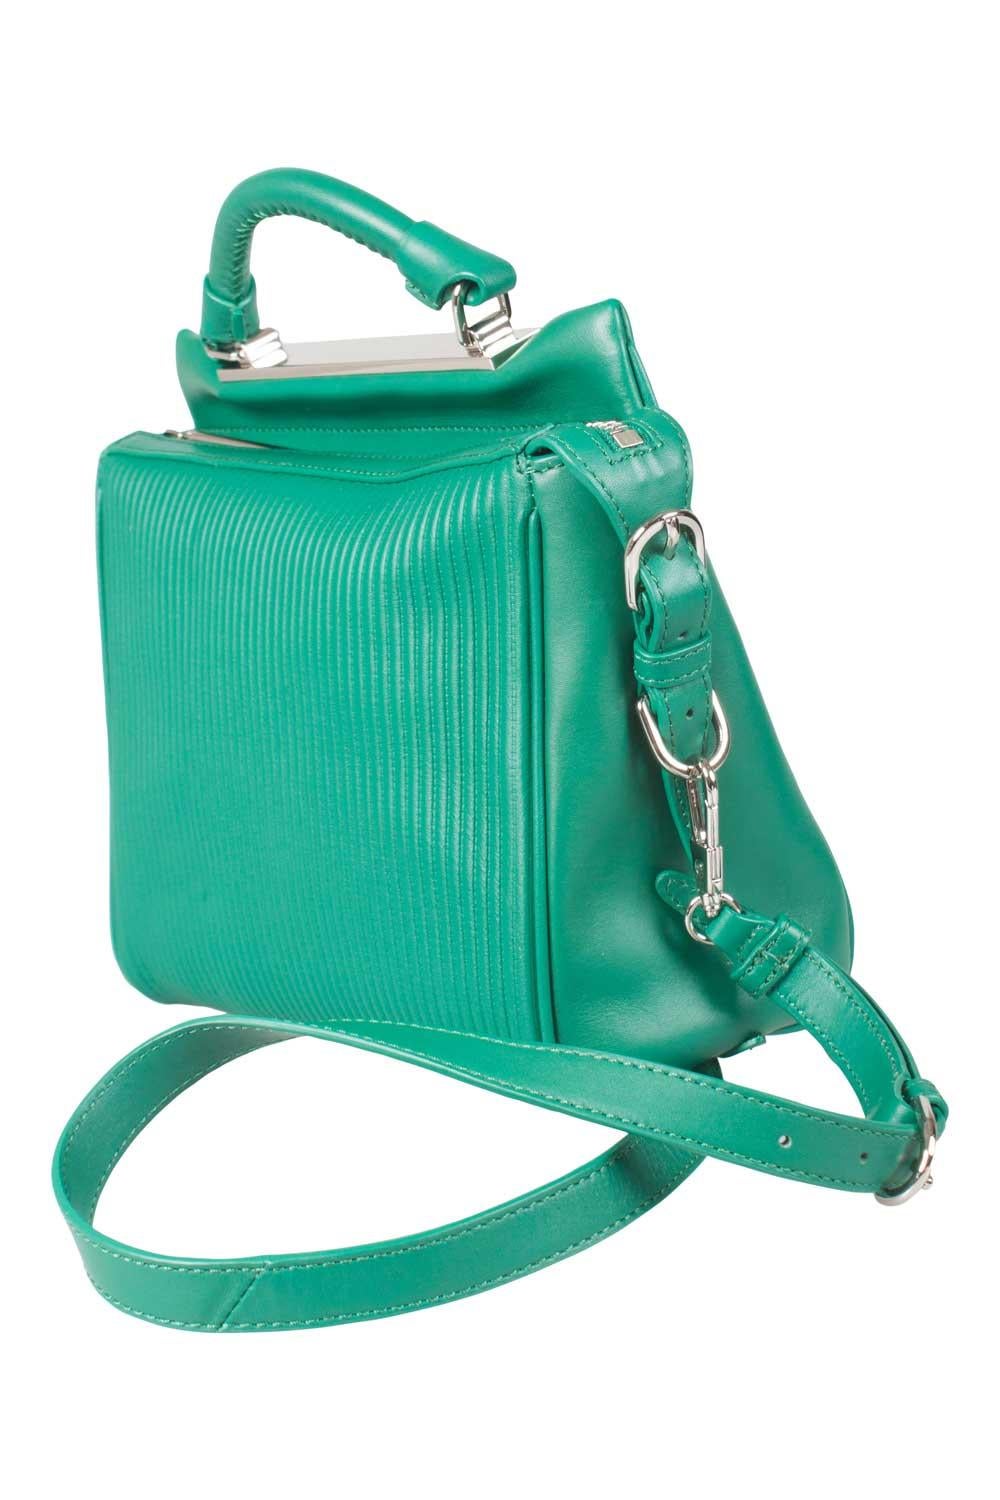 This top handle Ryder bag comes with a detachable shoulder strap and features an open compartment at the back. Designed by 3.1 Philip Lim, the green leather bag has a spacious canvas interior that is secured by a silver-tone zipper. Carry the